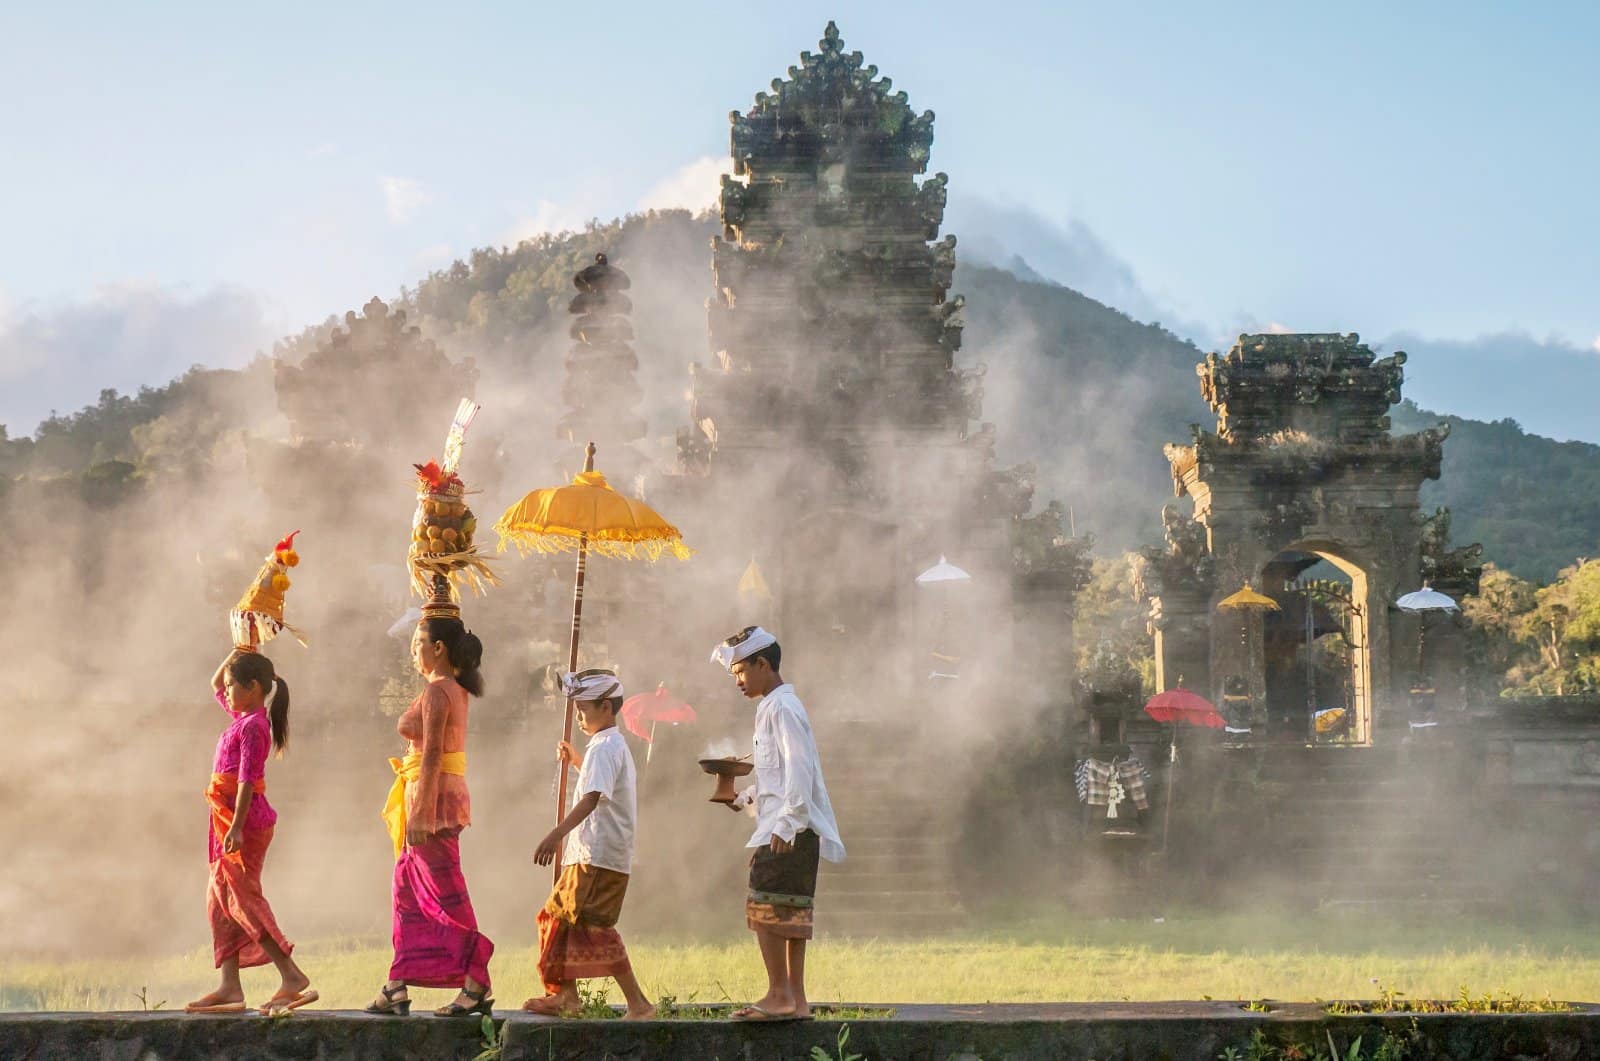 Image Credit: Shutterstock / CherylRamalho <p><span>Ubud is the cultural heart of Bali and a sanctuary for those seeking health and wellness, including plant-based eaters. The town is dotted with vegan and vegetarian restaurants that use fresh, organic ingredients to create dishes inspired by local flavors and international cuisines. Ubud’s relaxed atmosphere is complemented by its scenic beauty, making it the perfect place to enjoy nourishing plant-based meals.</span></p> <p><b>Insider’s Tip: </b><span>Look for cafes and restaurants that offer cooking classes, where you can learn how to prepare Balinese vegan dishes using local ingredients.</span></p>